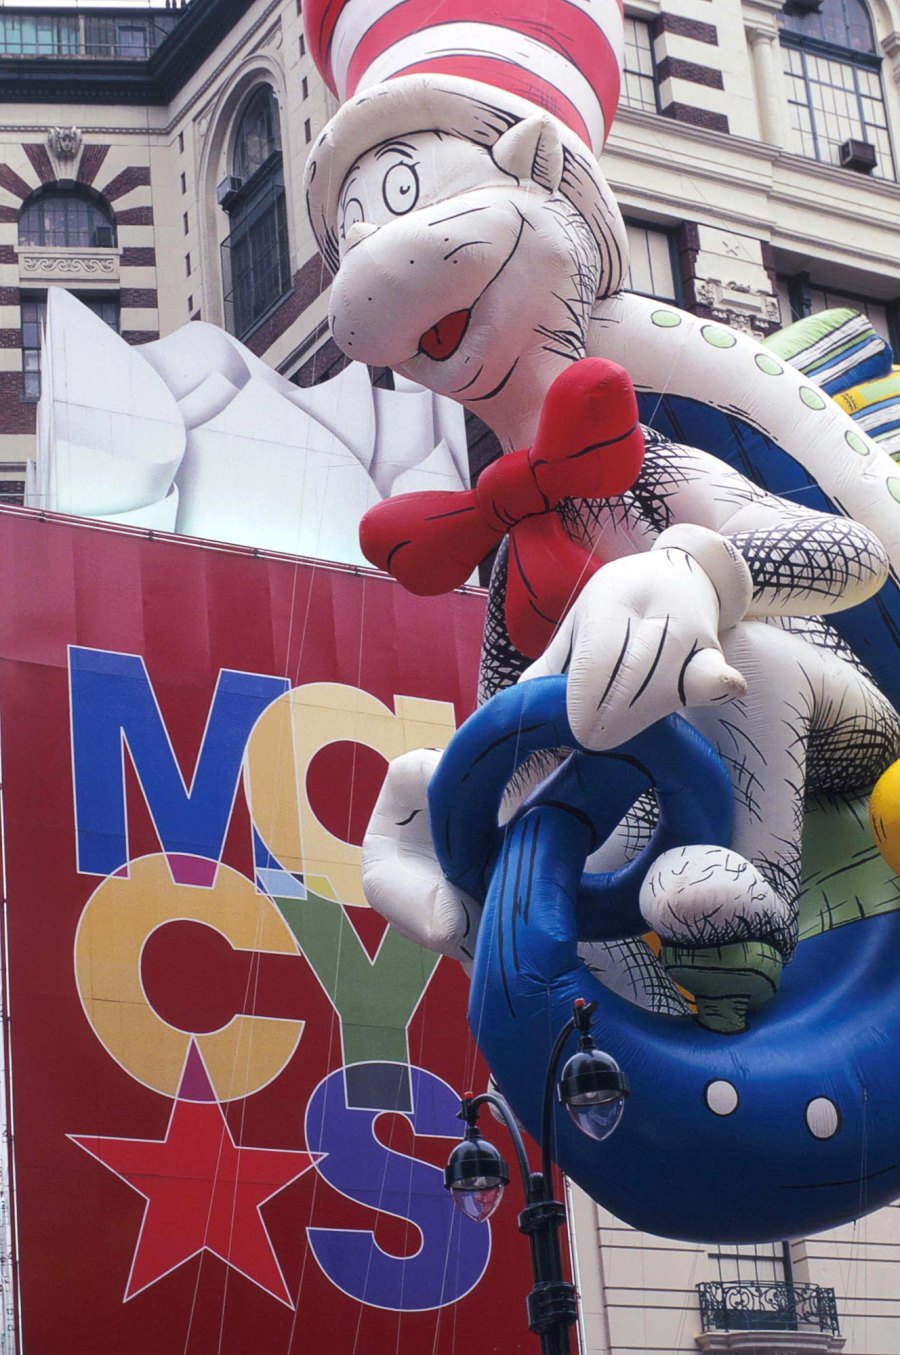 Biggest Macy s Thanksgiving Day Parade Mishaps From Runaway Balloons to Audience Injuries 331